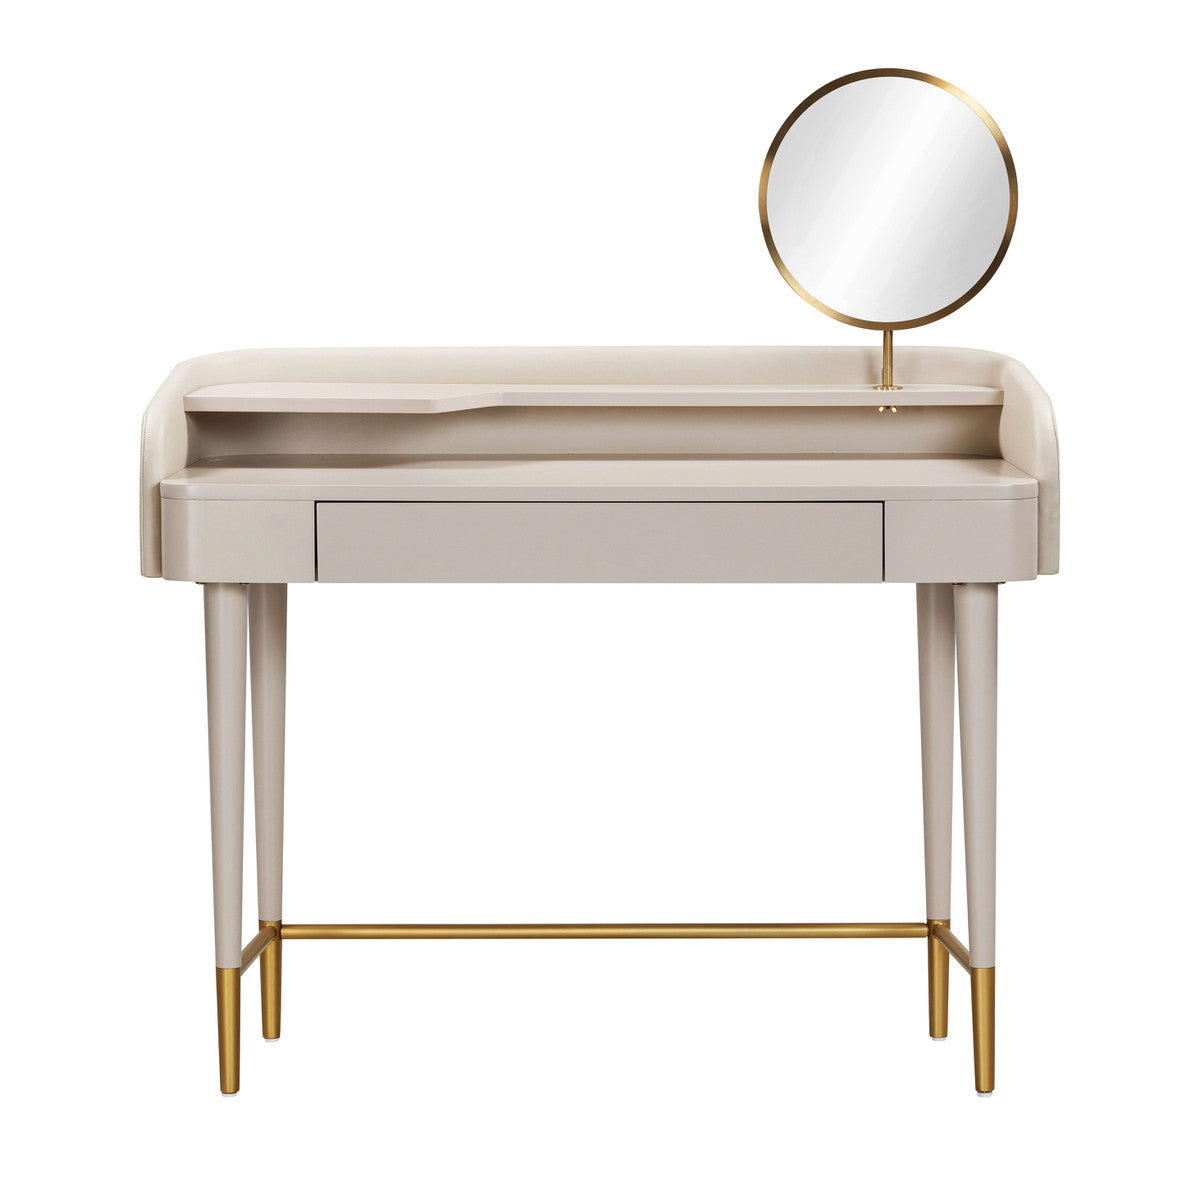 Cristiano Taupe Vegan Leather Wrapped Vanity Desk - Taupe/Brass